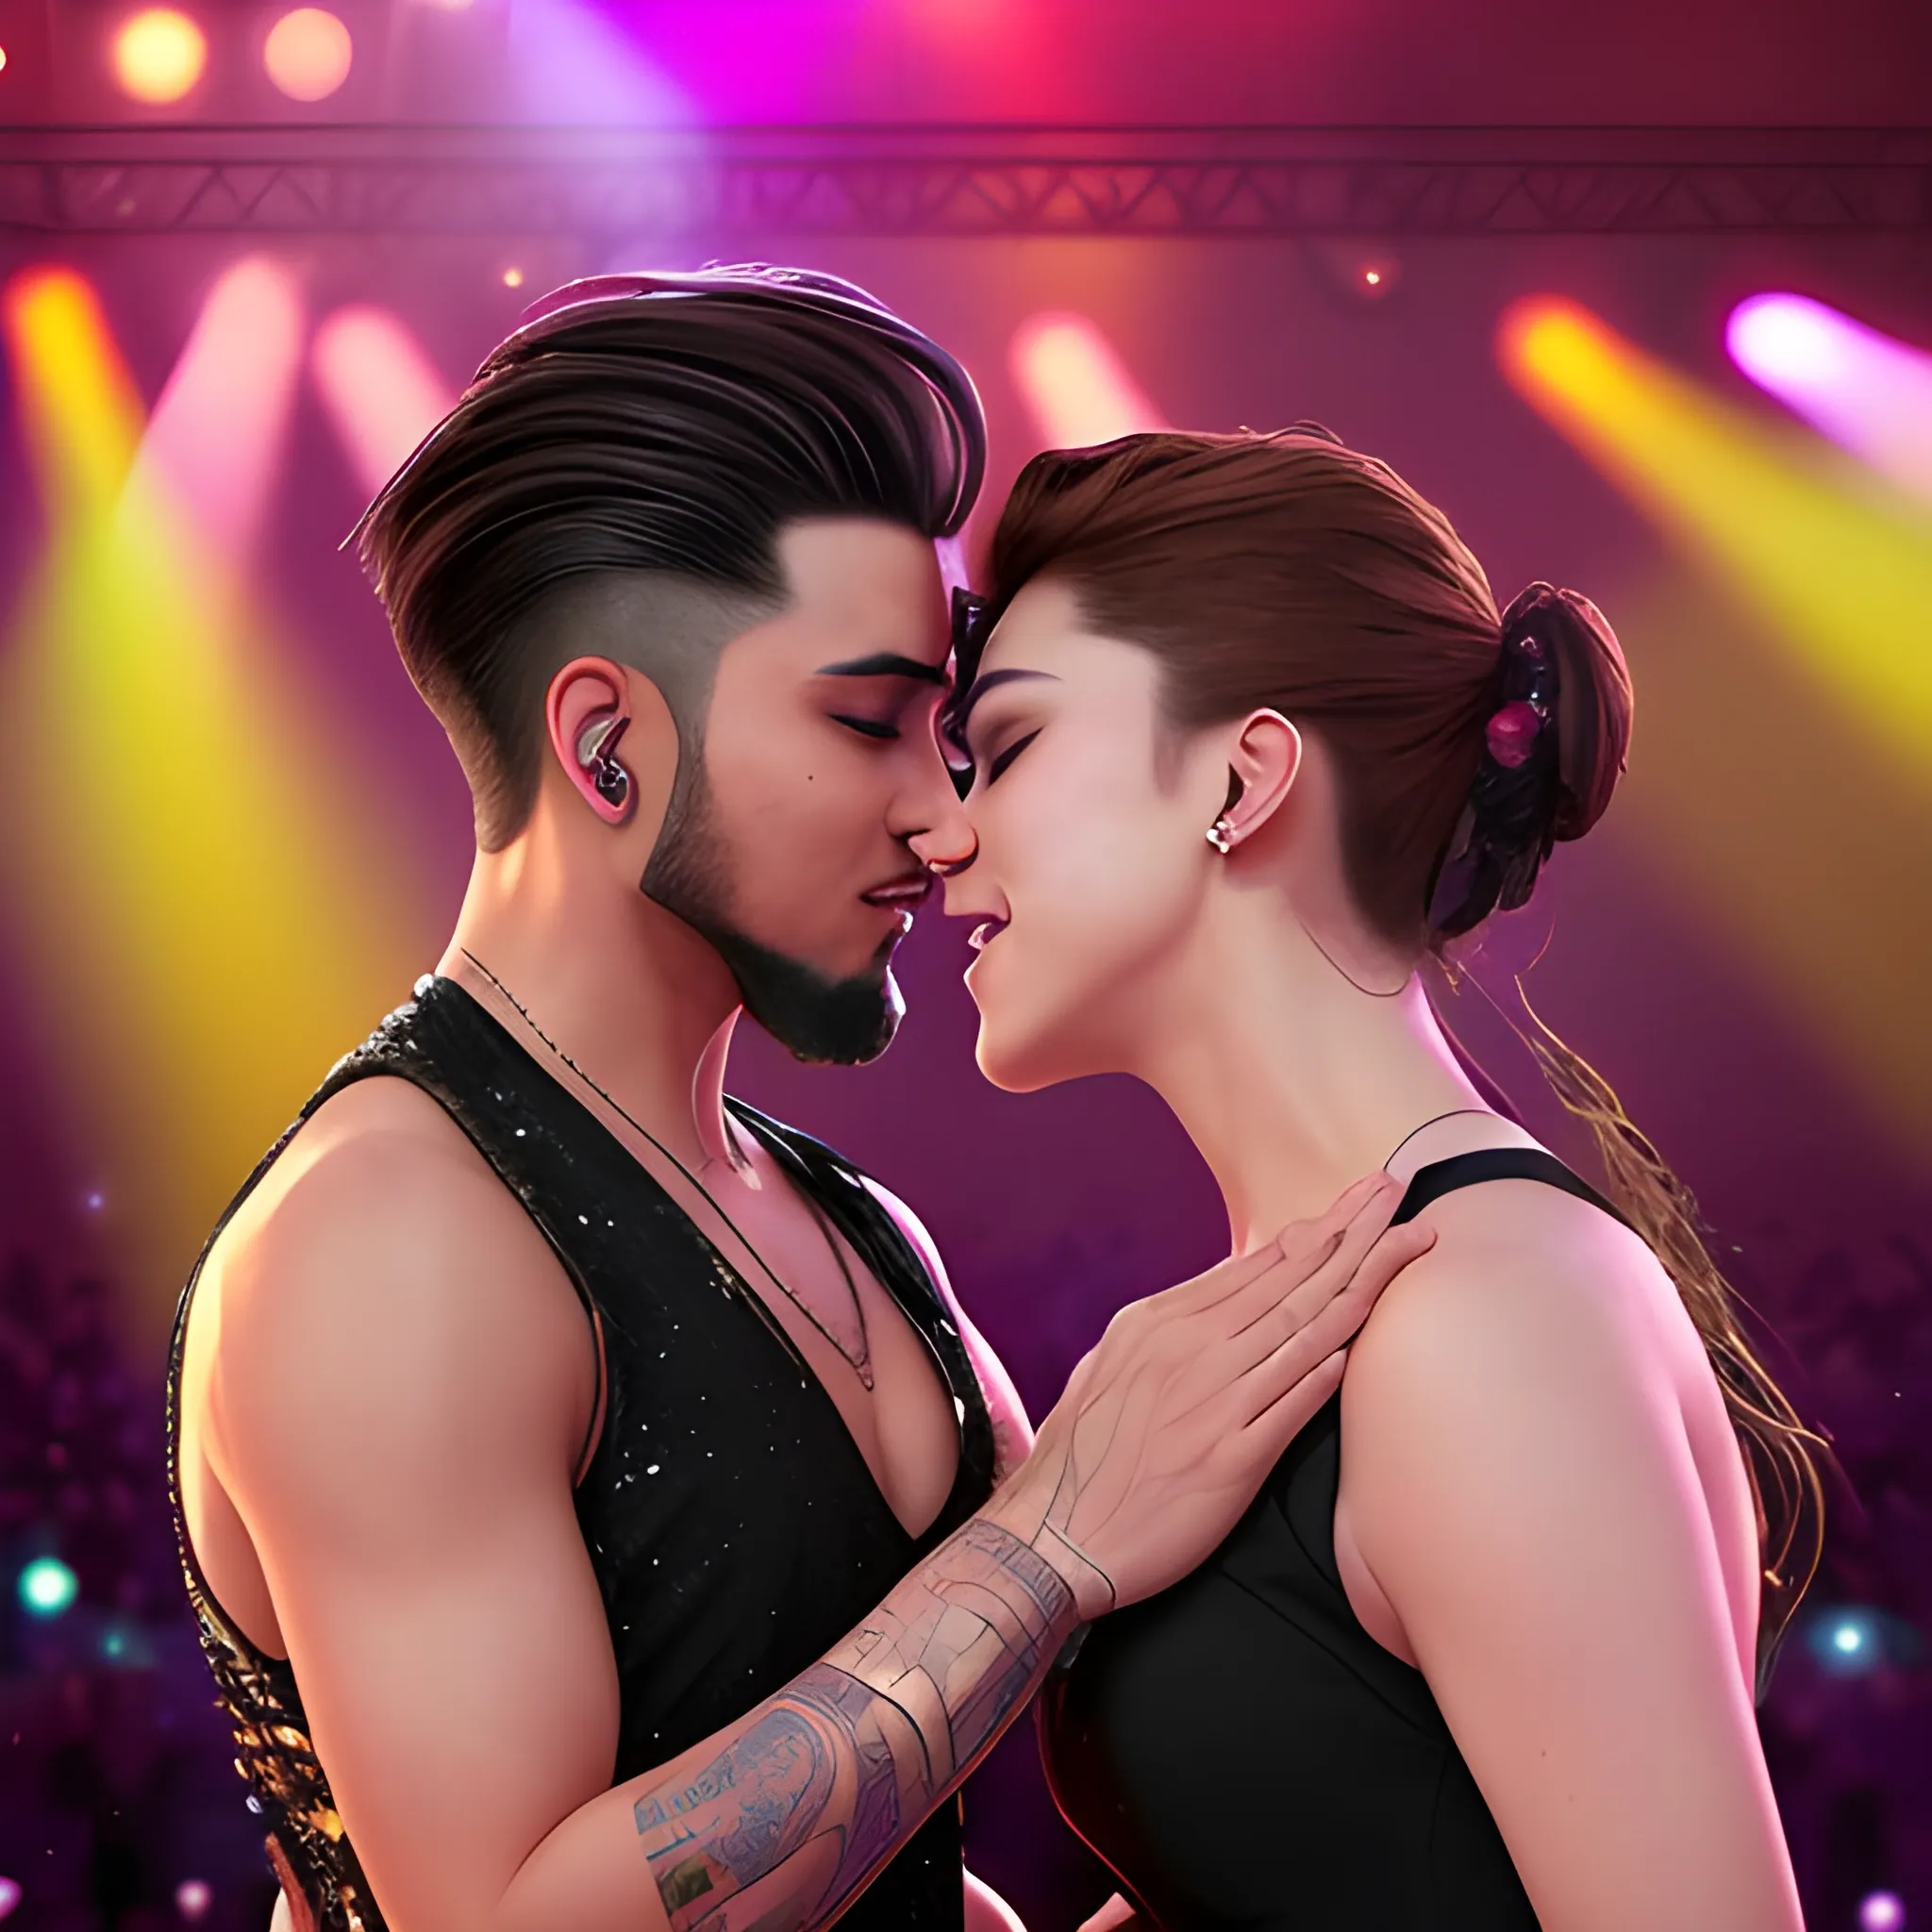 A male singer commands the stage with confidence, his distinctive goatee and brown undercut hair giving him a unique flair. Bathed in a bright spotlight, his movements exude charisma and musical passion. In the audience, a woman with long, straight brown hair watches him with love in her eyes, creating an intense connection. Sweets fall from the sky like sparkling, colorful stars, adding a magical and playful touch to the scene, where music and affection converge in a single unforgettable moment, anime.